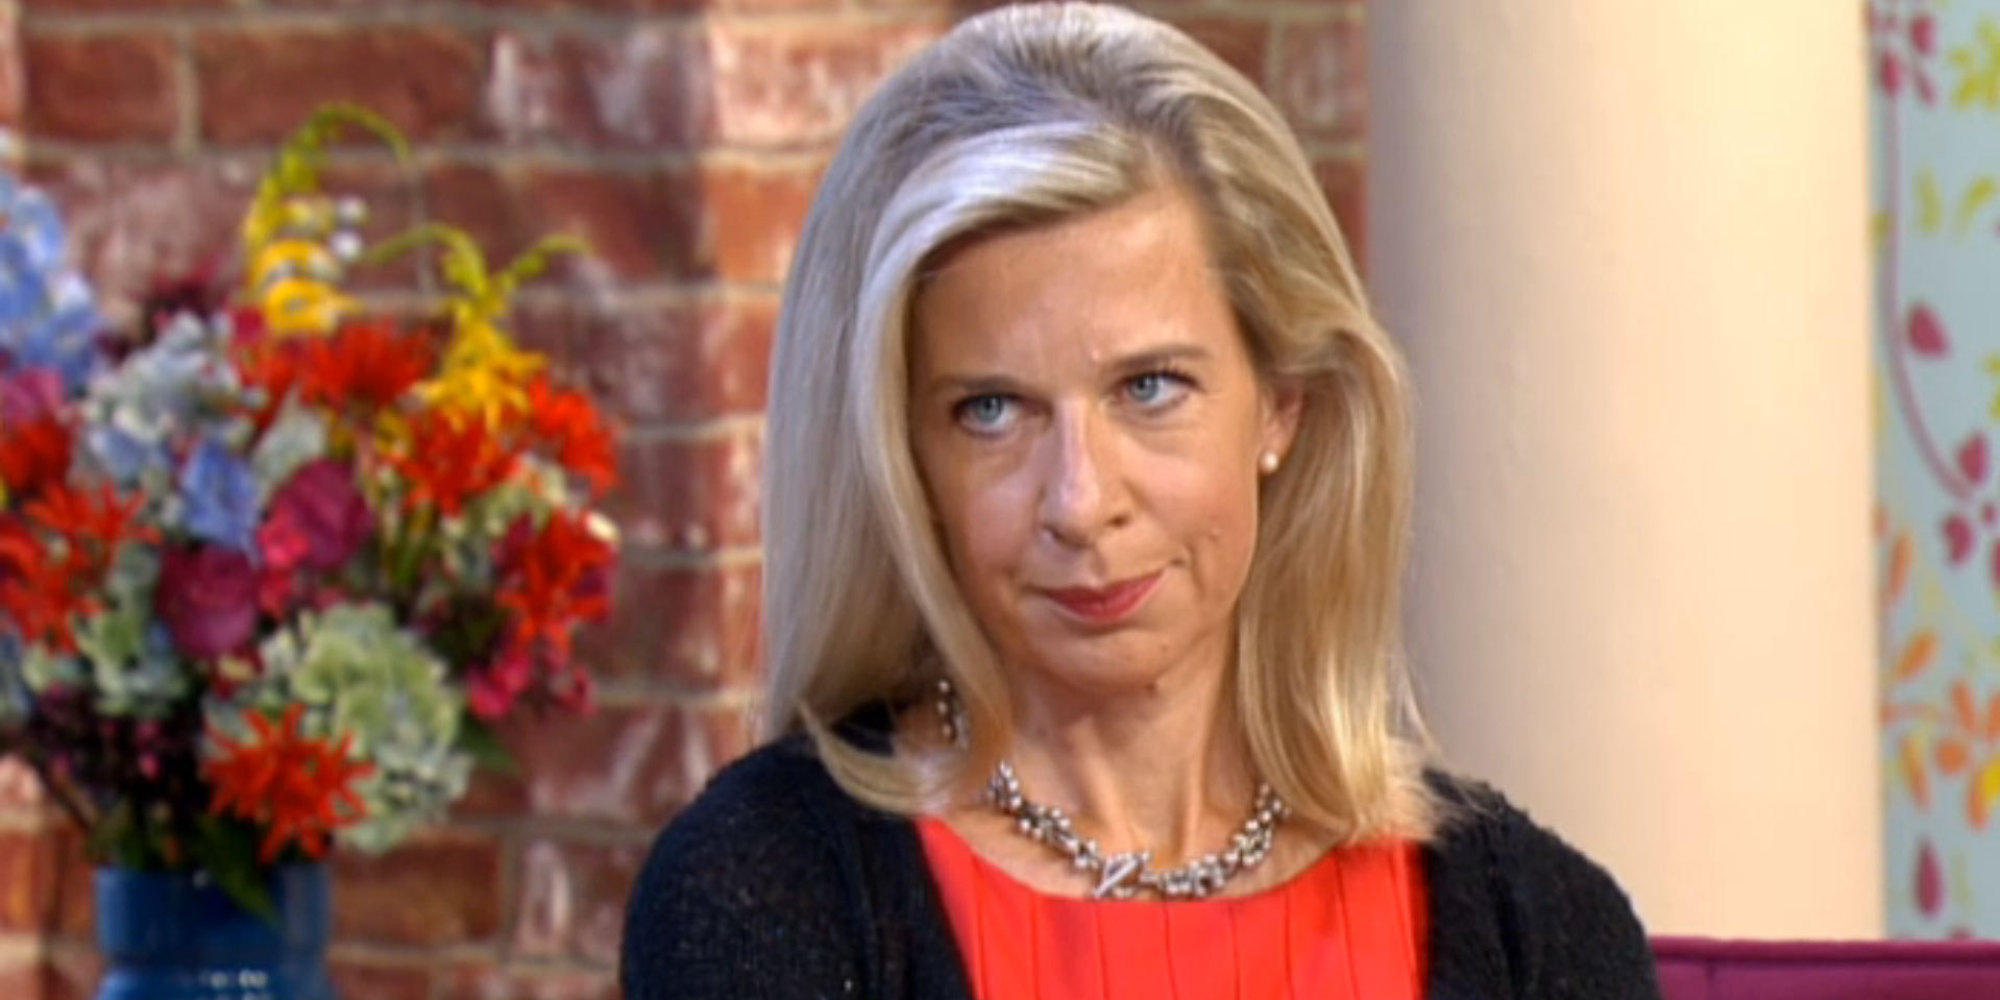 Katie Hopkins Returns To 'This Morning' But Proves Less Controversial With Her Views ...2000 x 1000